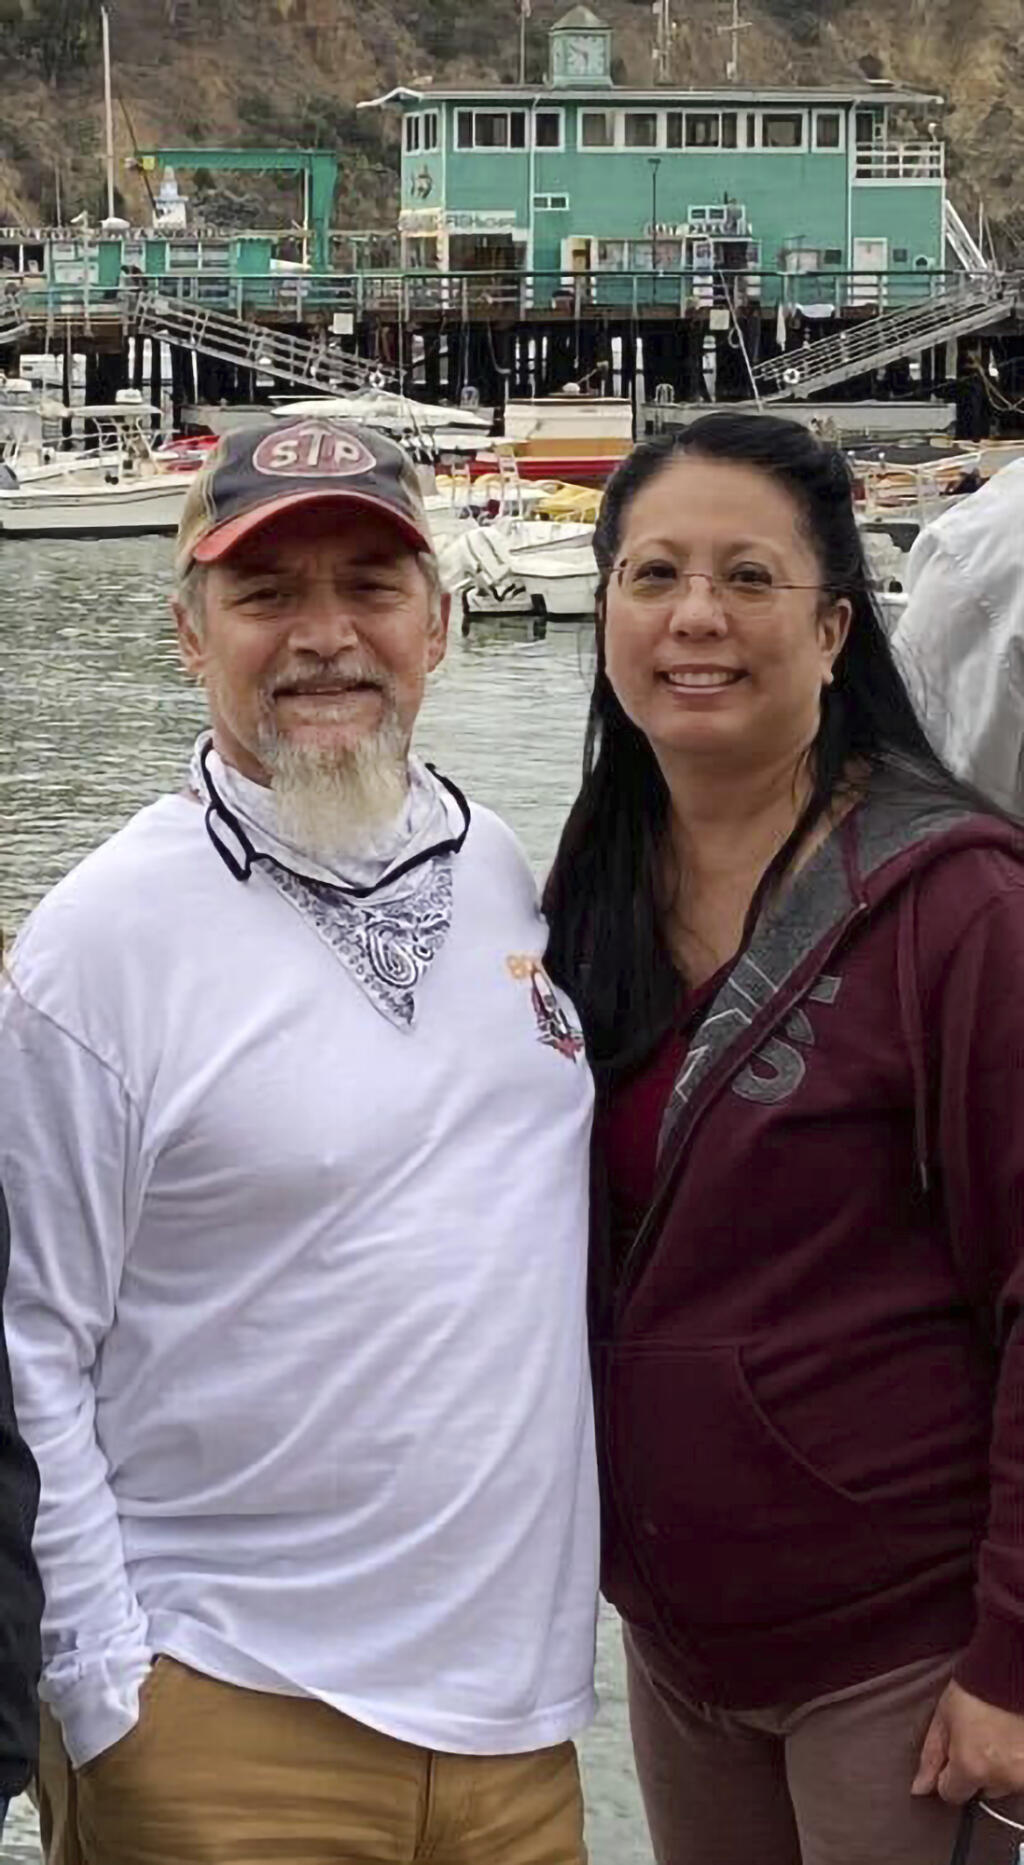 This undated photo provided by James Solis shows Robert Solis, left and his partner Brandi Tyau, right. Robert Solis and Tyau were aboard the charter fishing vessel Awakin when it ran into trouble Sunday in rough seas off the coast of southeast Alaska. The bodies of three of the five people aboard have been found but two people remain missing. Authorities are working to salvage the boat, which was found partially submerged off an island near Sitka, Alaska. Those on the vessel were Solis and Tyau, Tyau's sister and her partner and the boat captain. (James Solis via AP)